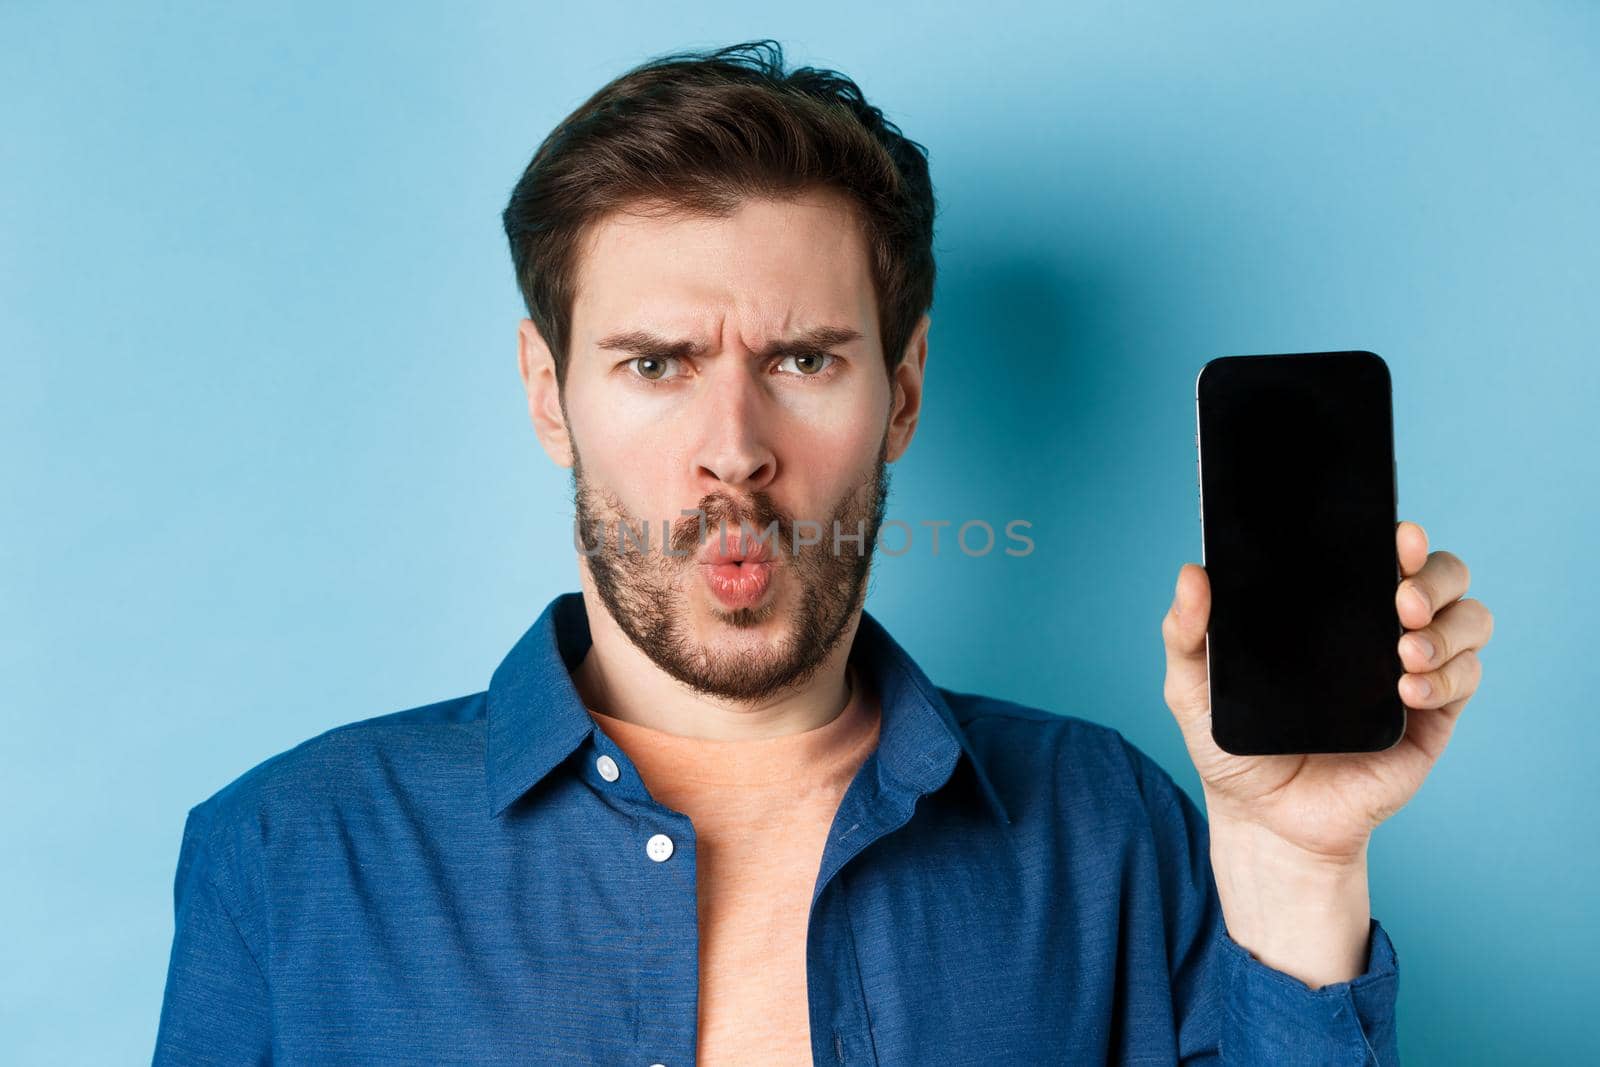 Shocked and confused young man frowning bothered, complaining at something on mobile phone, showing empty screen, standing on blue background.